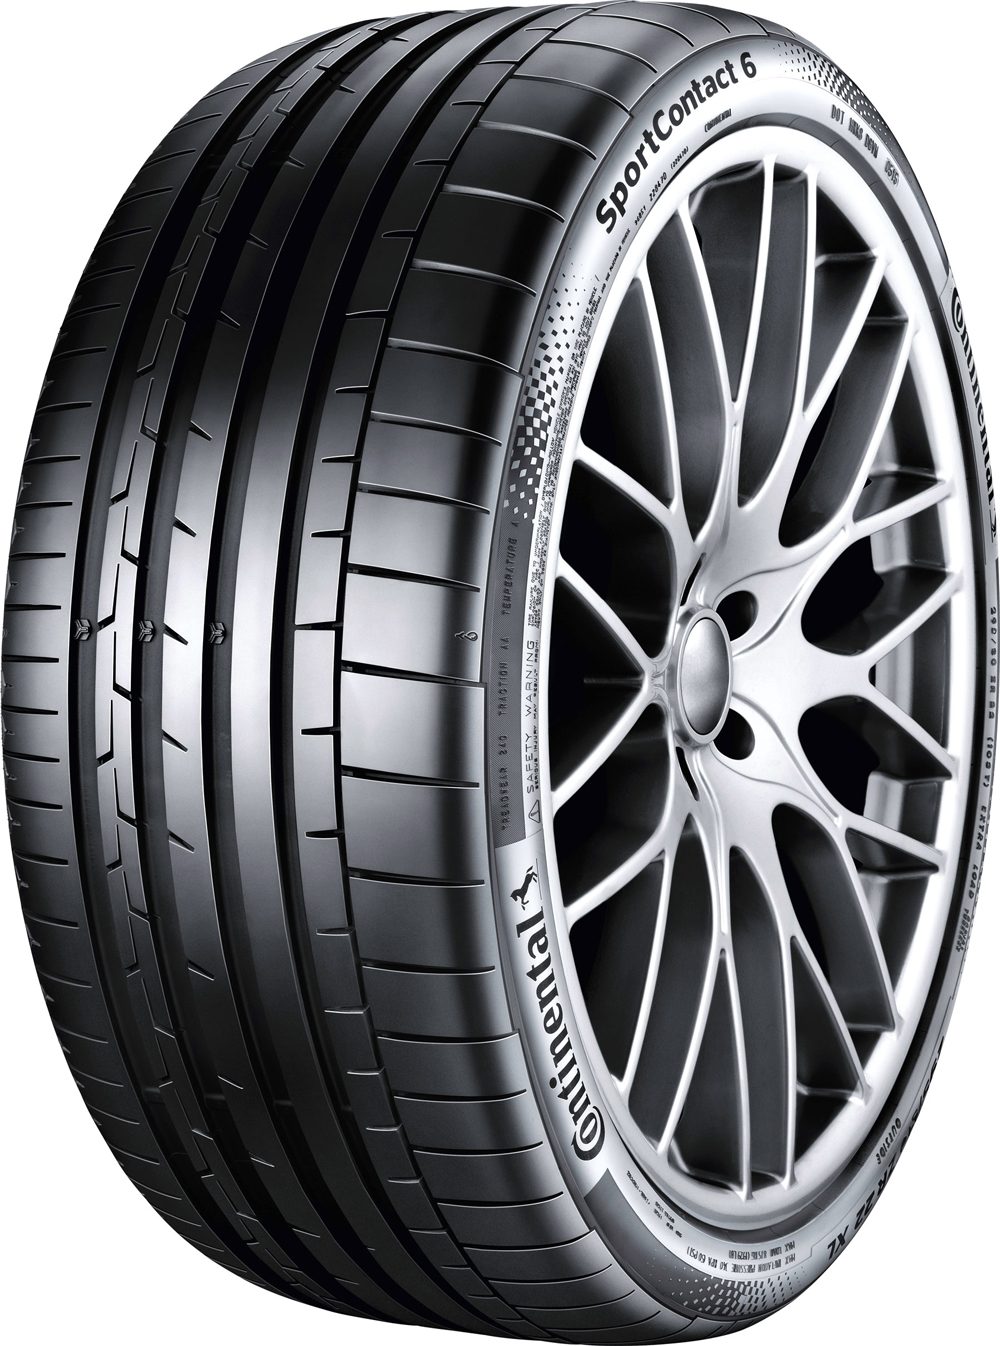 Гуми за джип CONTINENTAL SPORT CONTACT 6 MO MERCEDES 315/40 R21 111Y